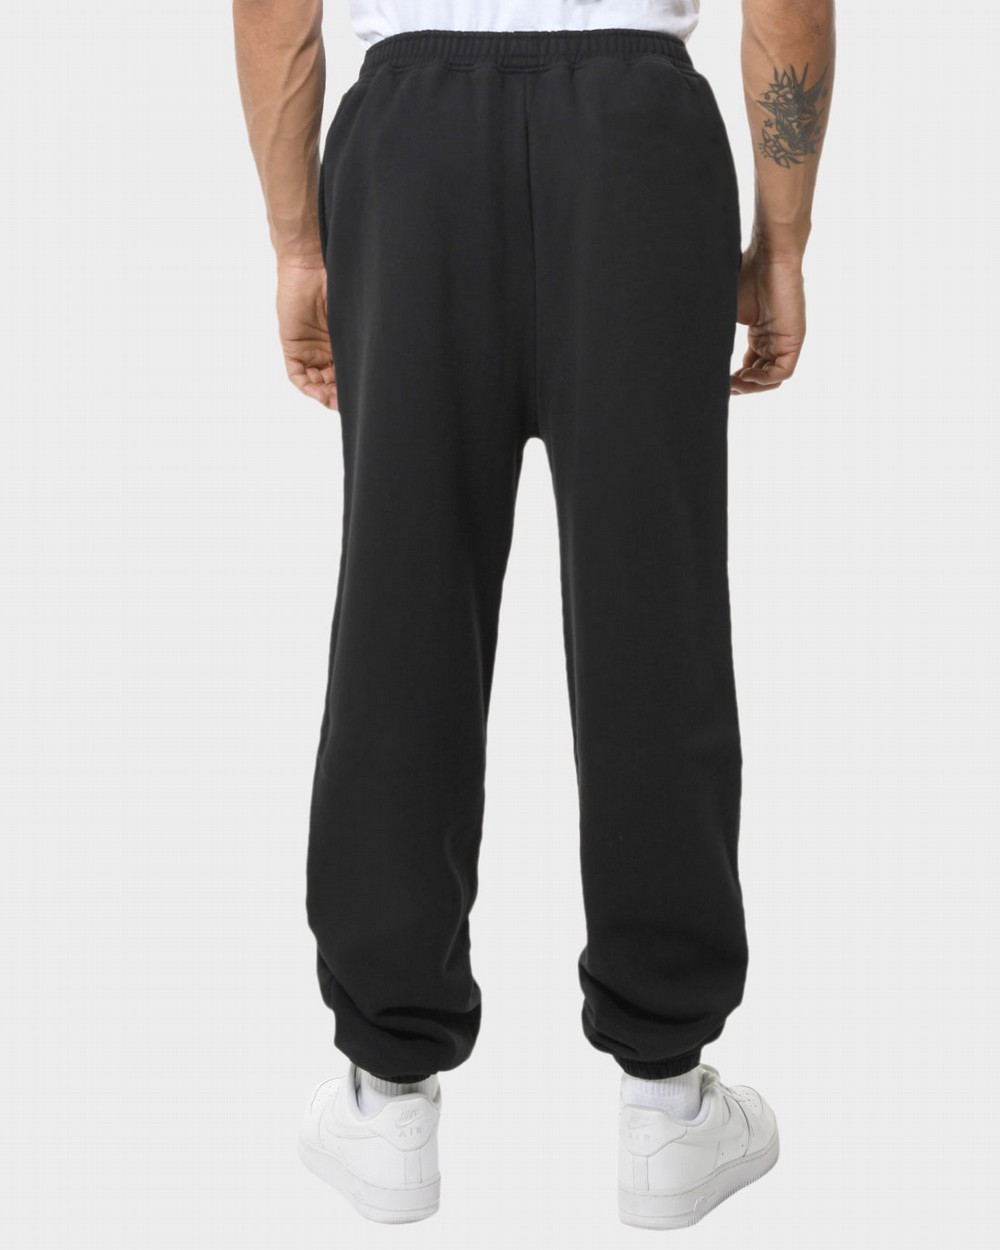 Men's Lightweight Sweatpants Loose Fit Open Bottom Mesh Athletic Long Pants  with Zipper Pockets - China Pants and Long Pants price | Made-in-China.com